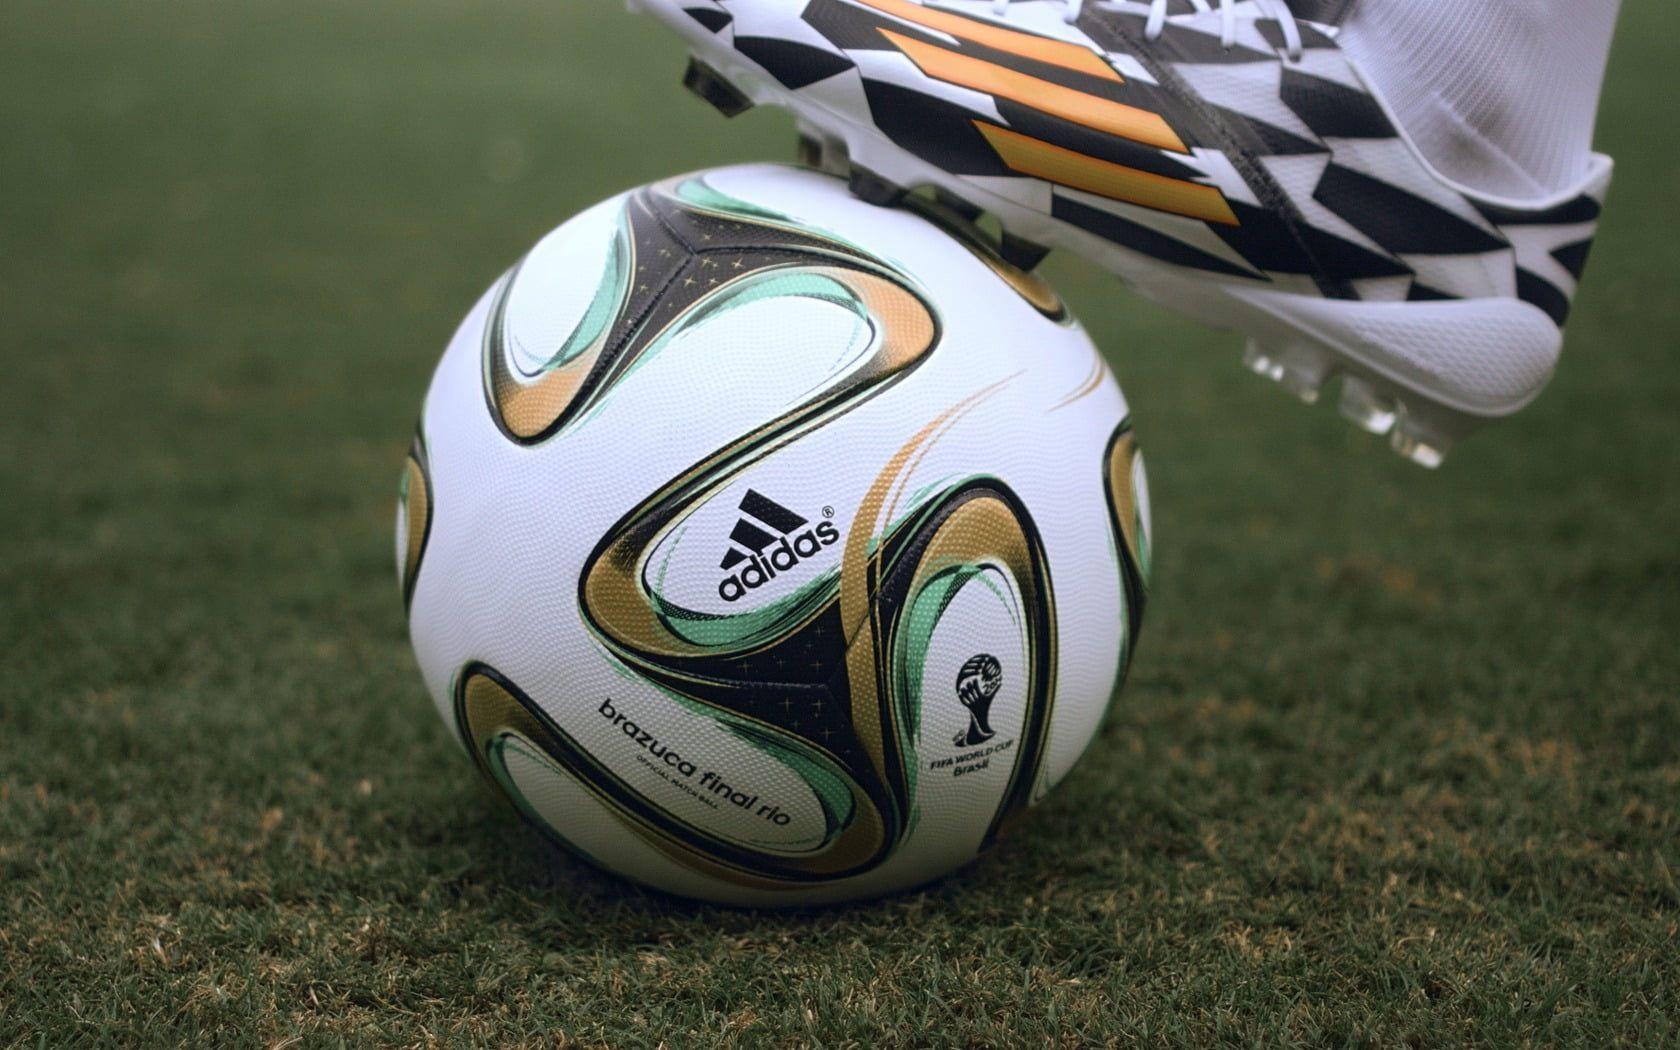 White, brown, teal, and black Adidas soccer ball on green grass